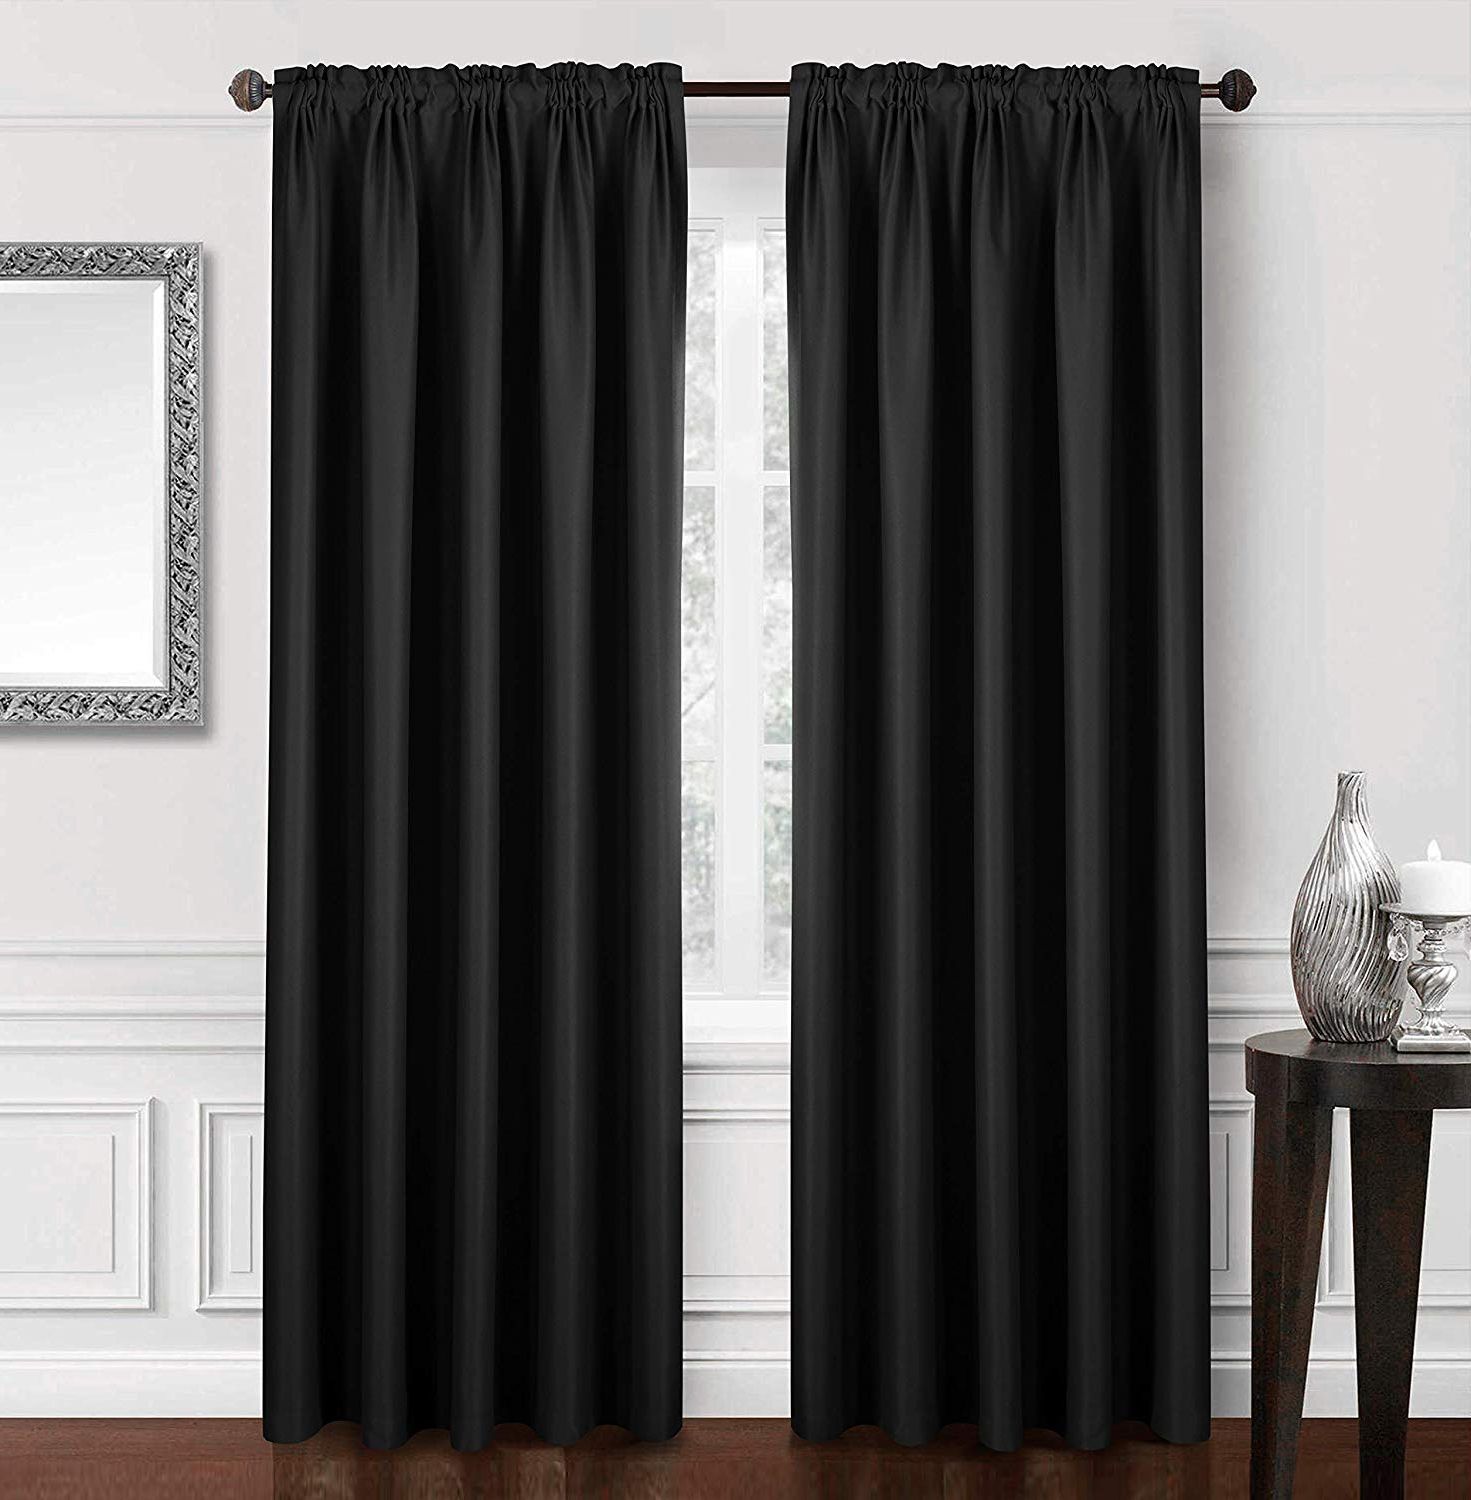 Dreaming Casa Solid Blackout Curtain For Bedroom 96 Inches Long Draperies  Window Treatment 2 Panels Black Rod Pocket 2(52" W X 96" L) Inside Famous Solid Cotton True Blackout Curtain Panels (View 17 of 20)